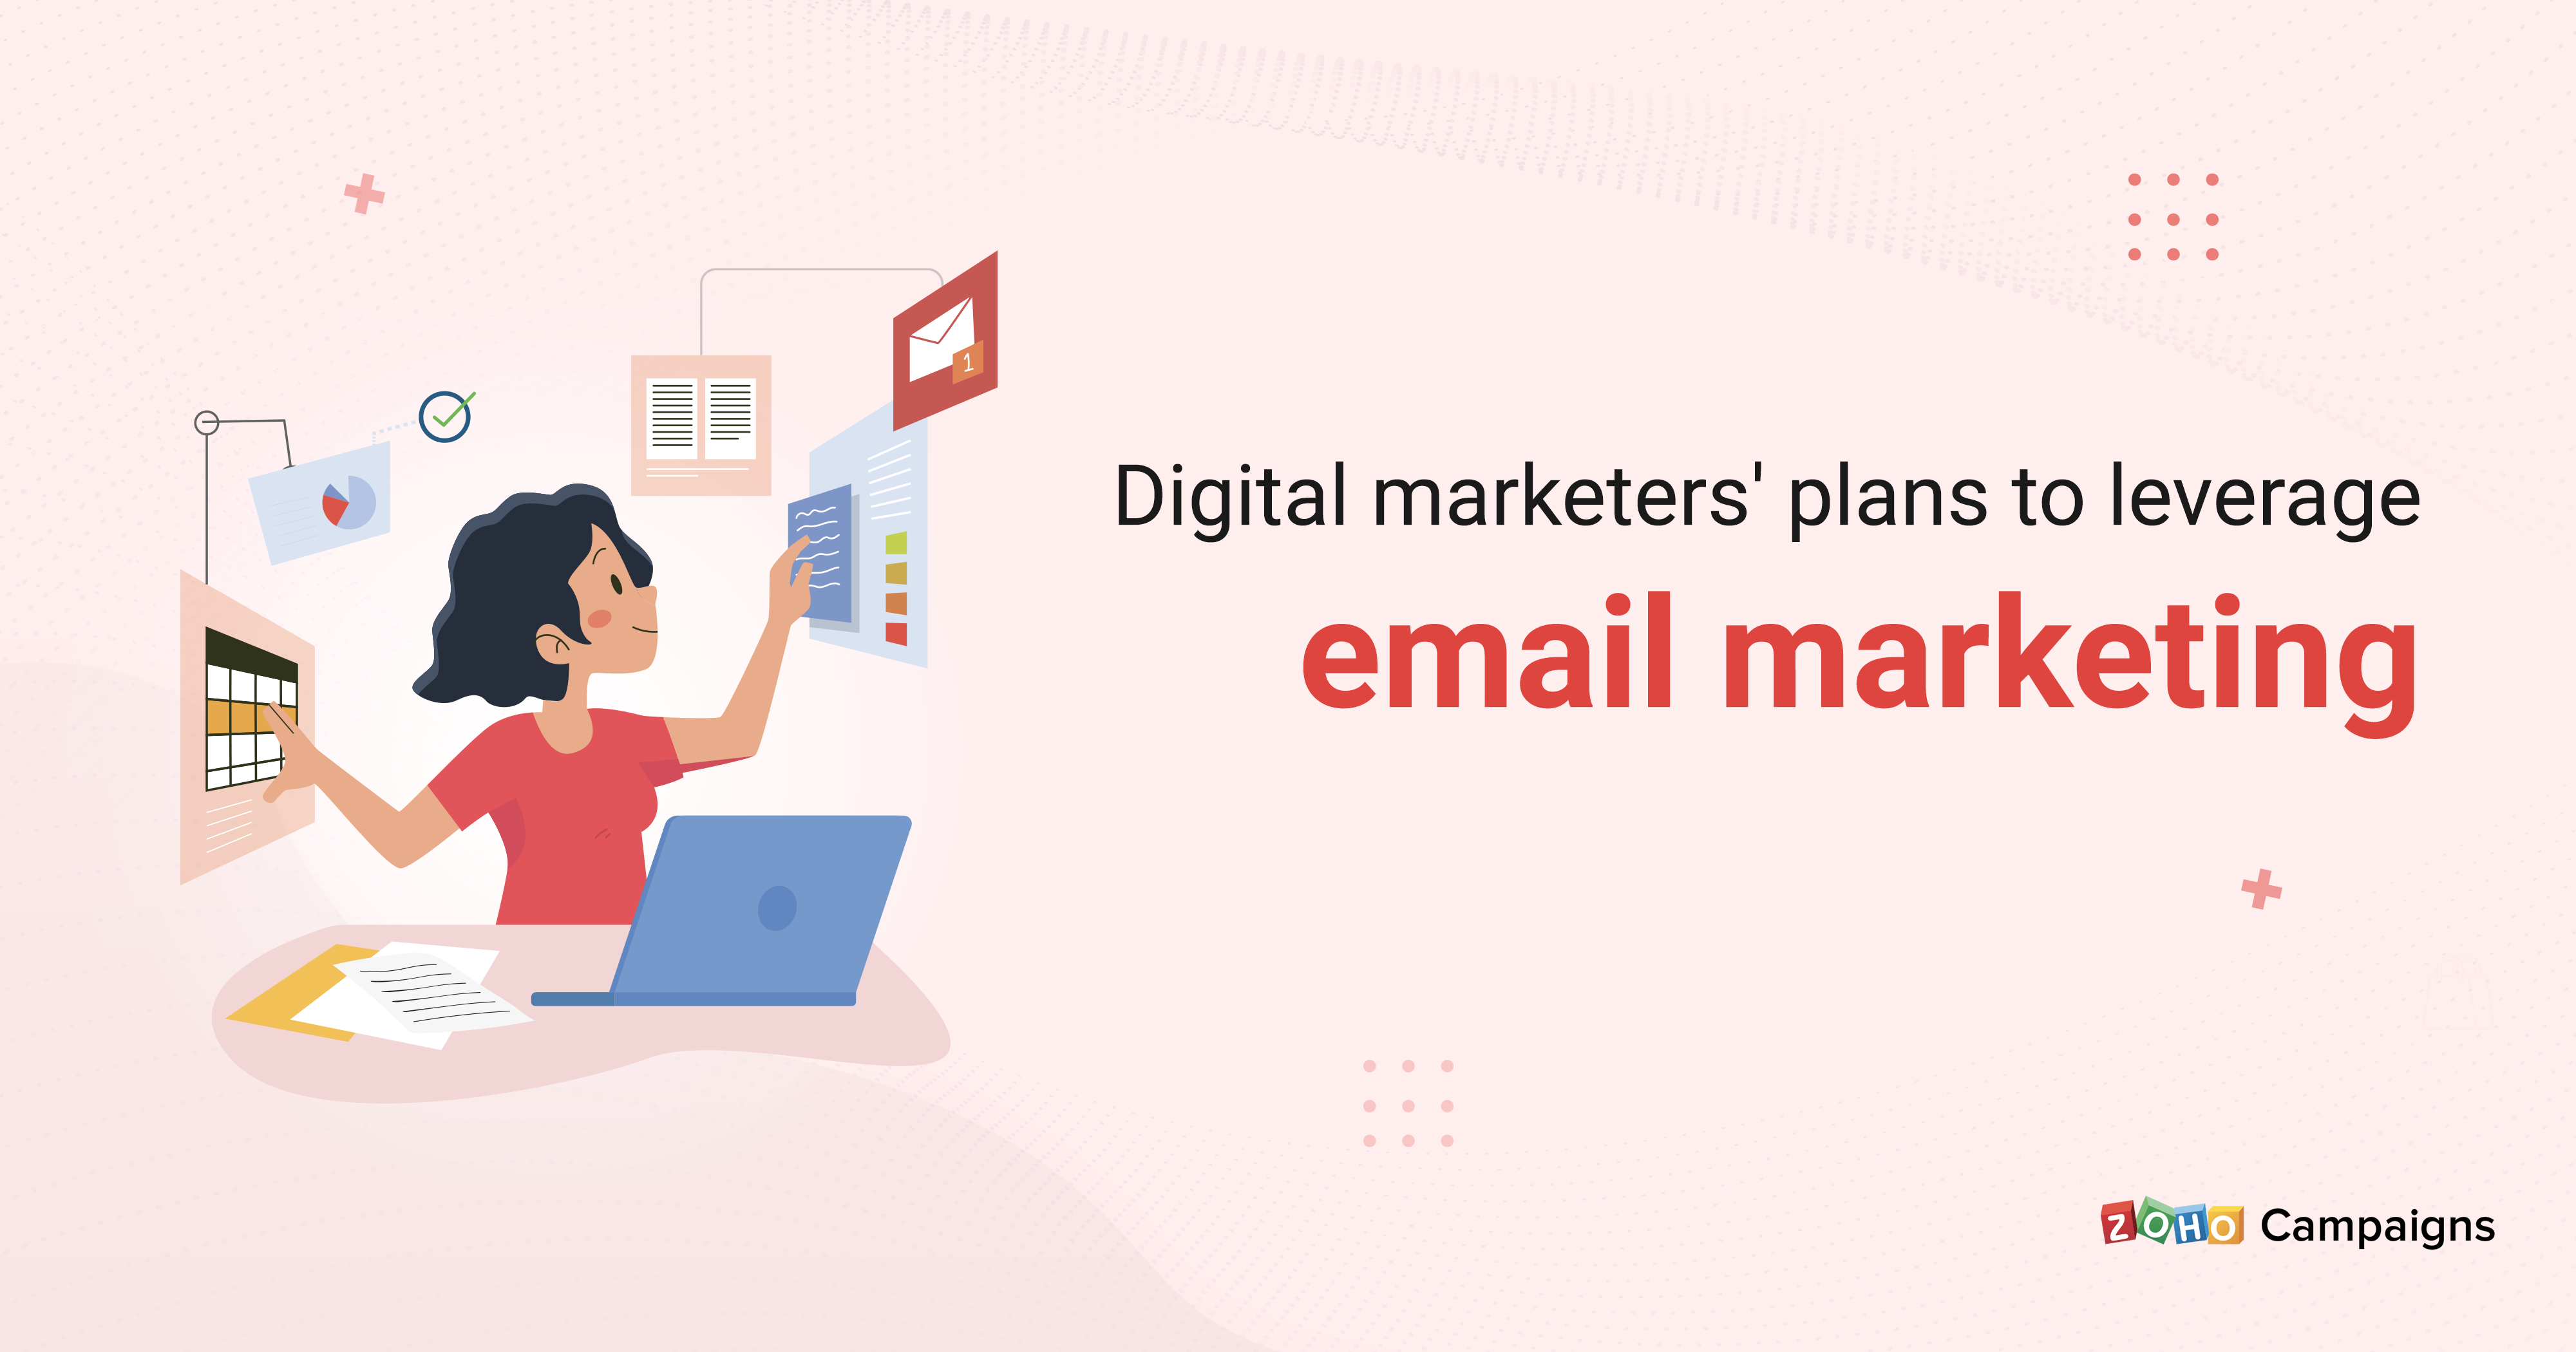 How digital marketers intend to optimize email marketing in 2021